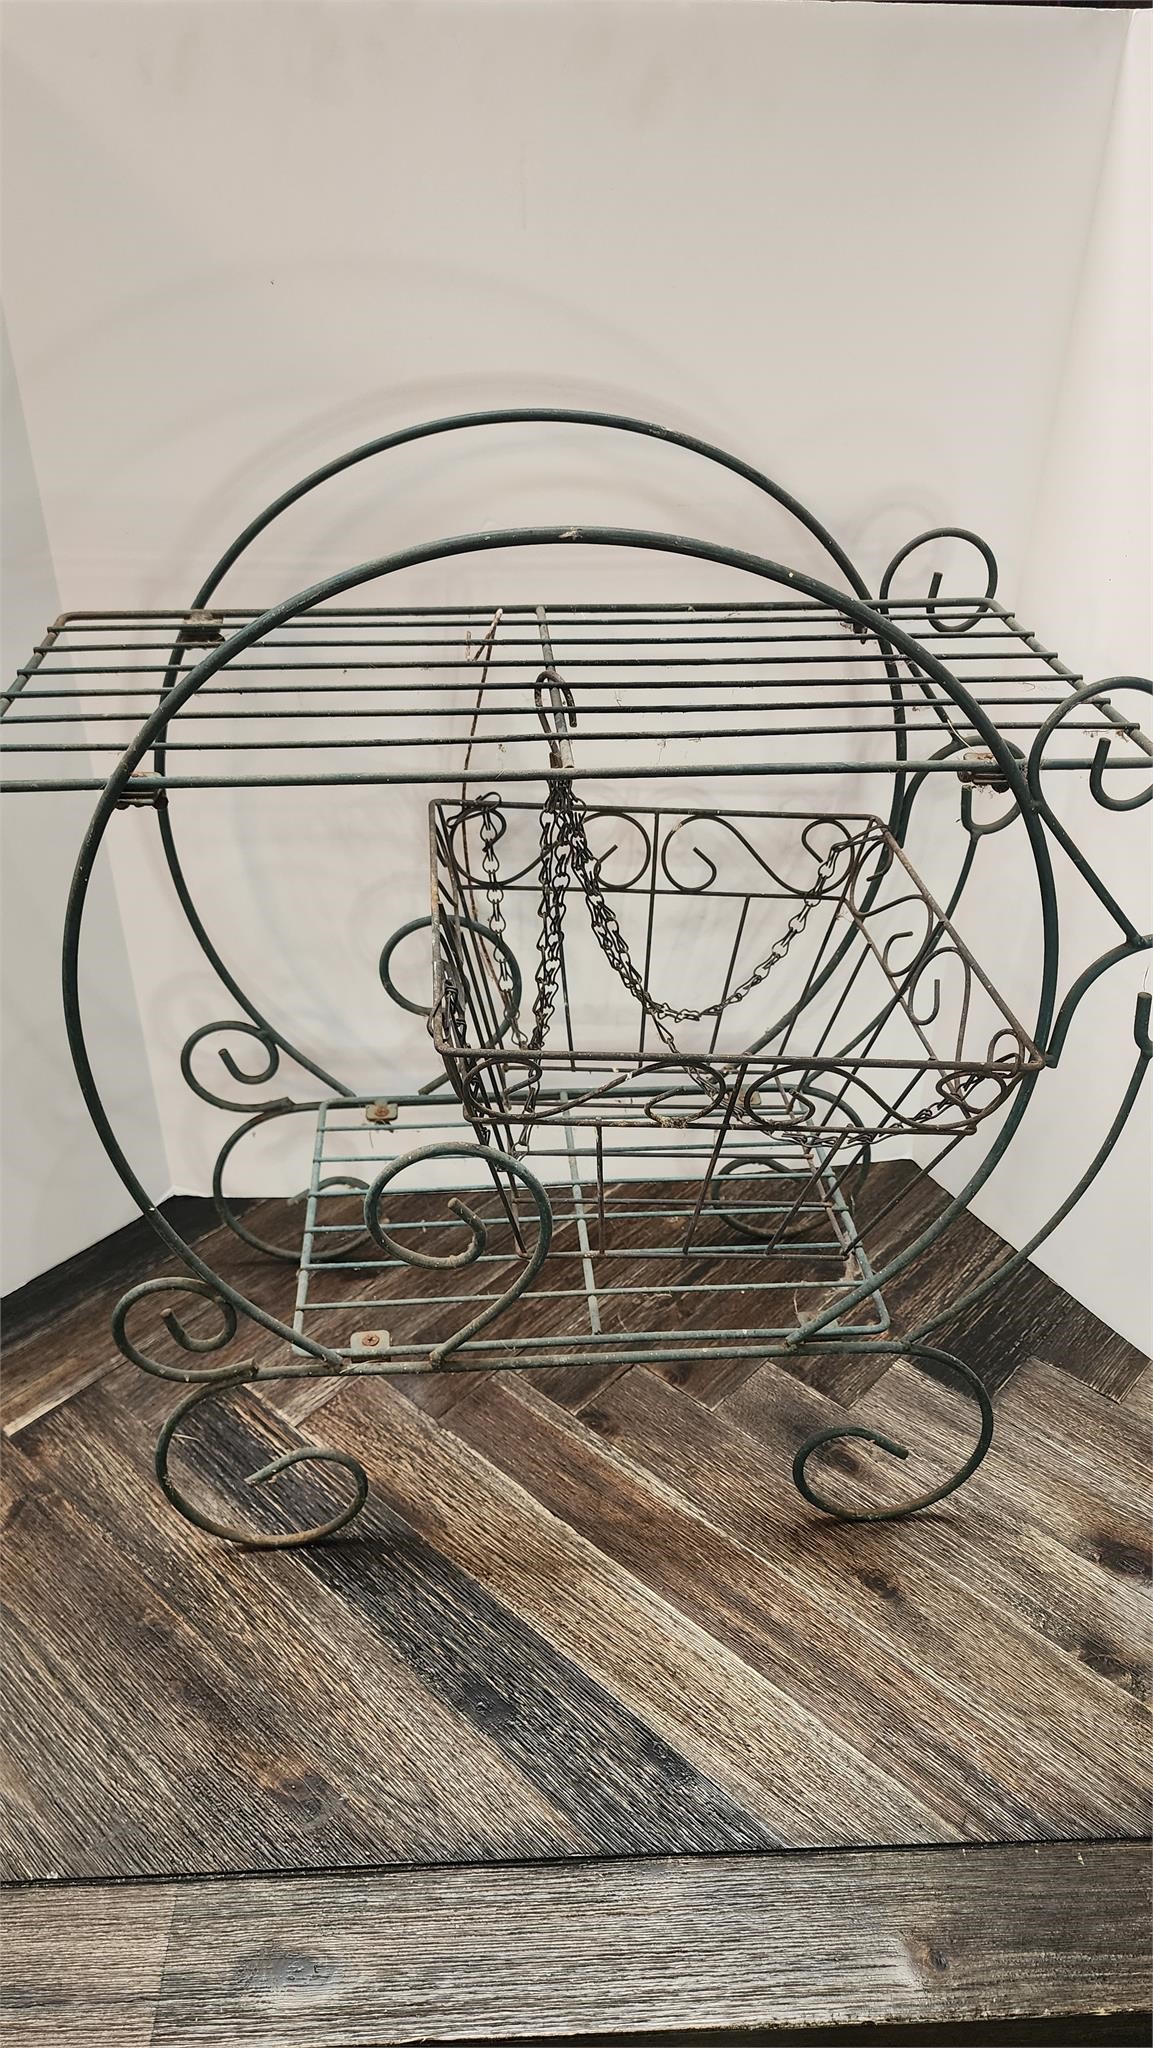 Metal Carriage Plant Stand